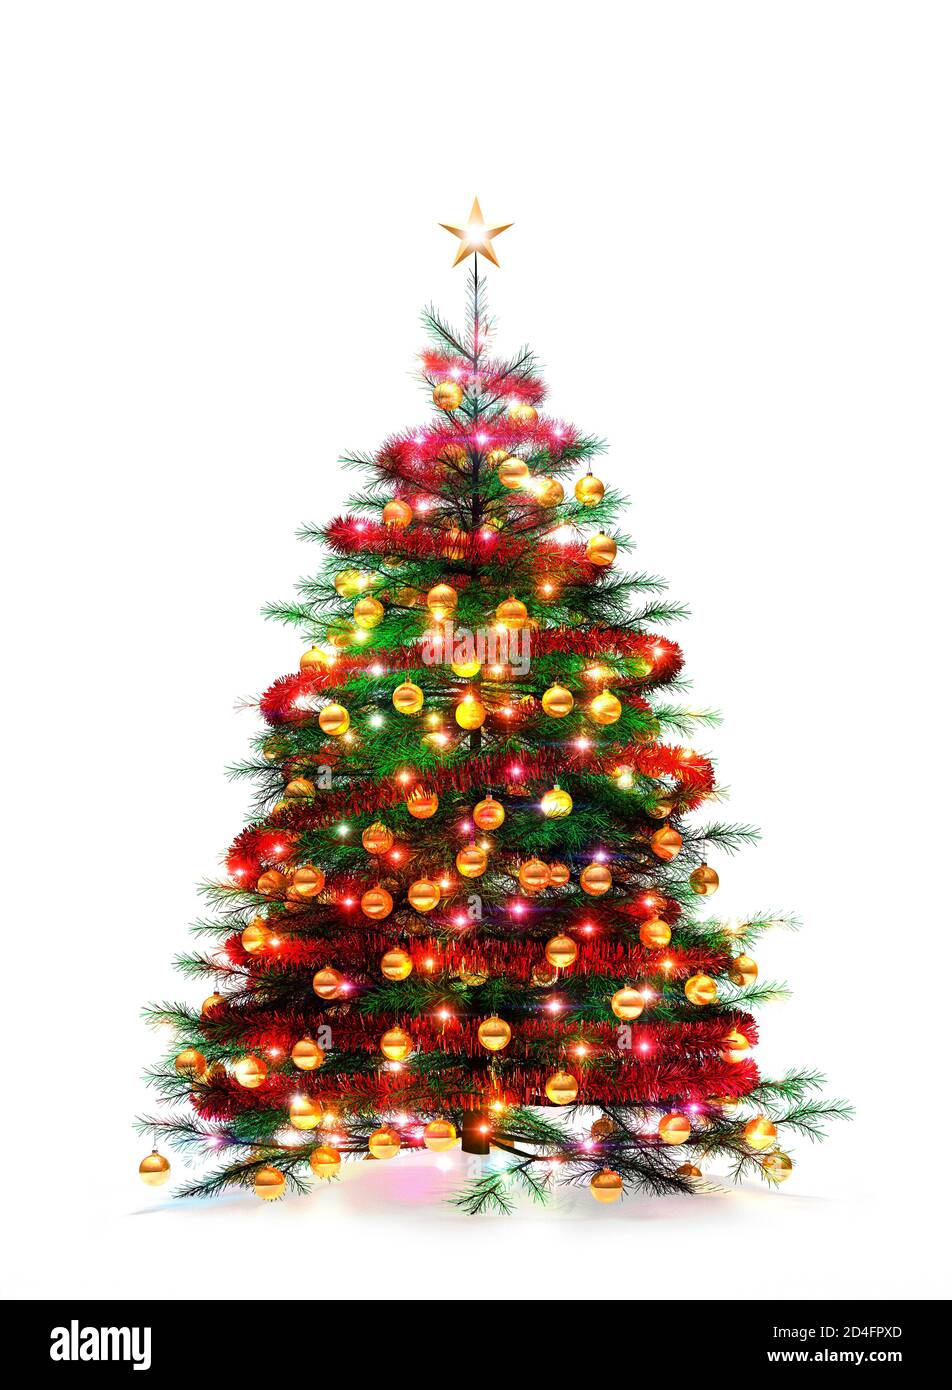 Christmas tree cut out white background snow on ground. Gold baubles, red tinsel, xmas lights, isolated Stock Photo